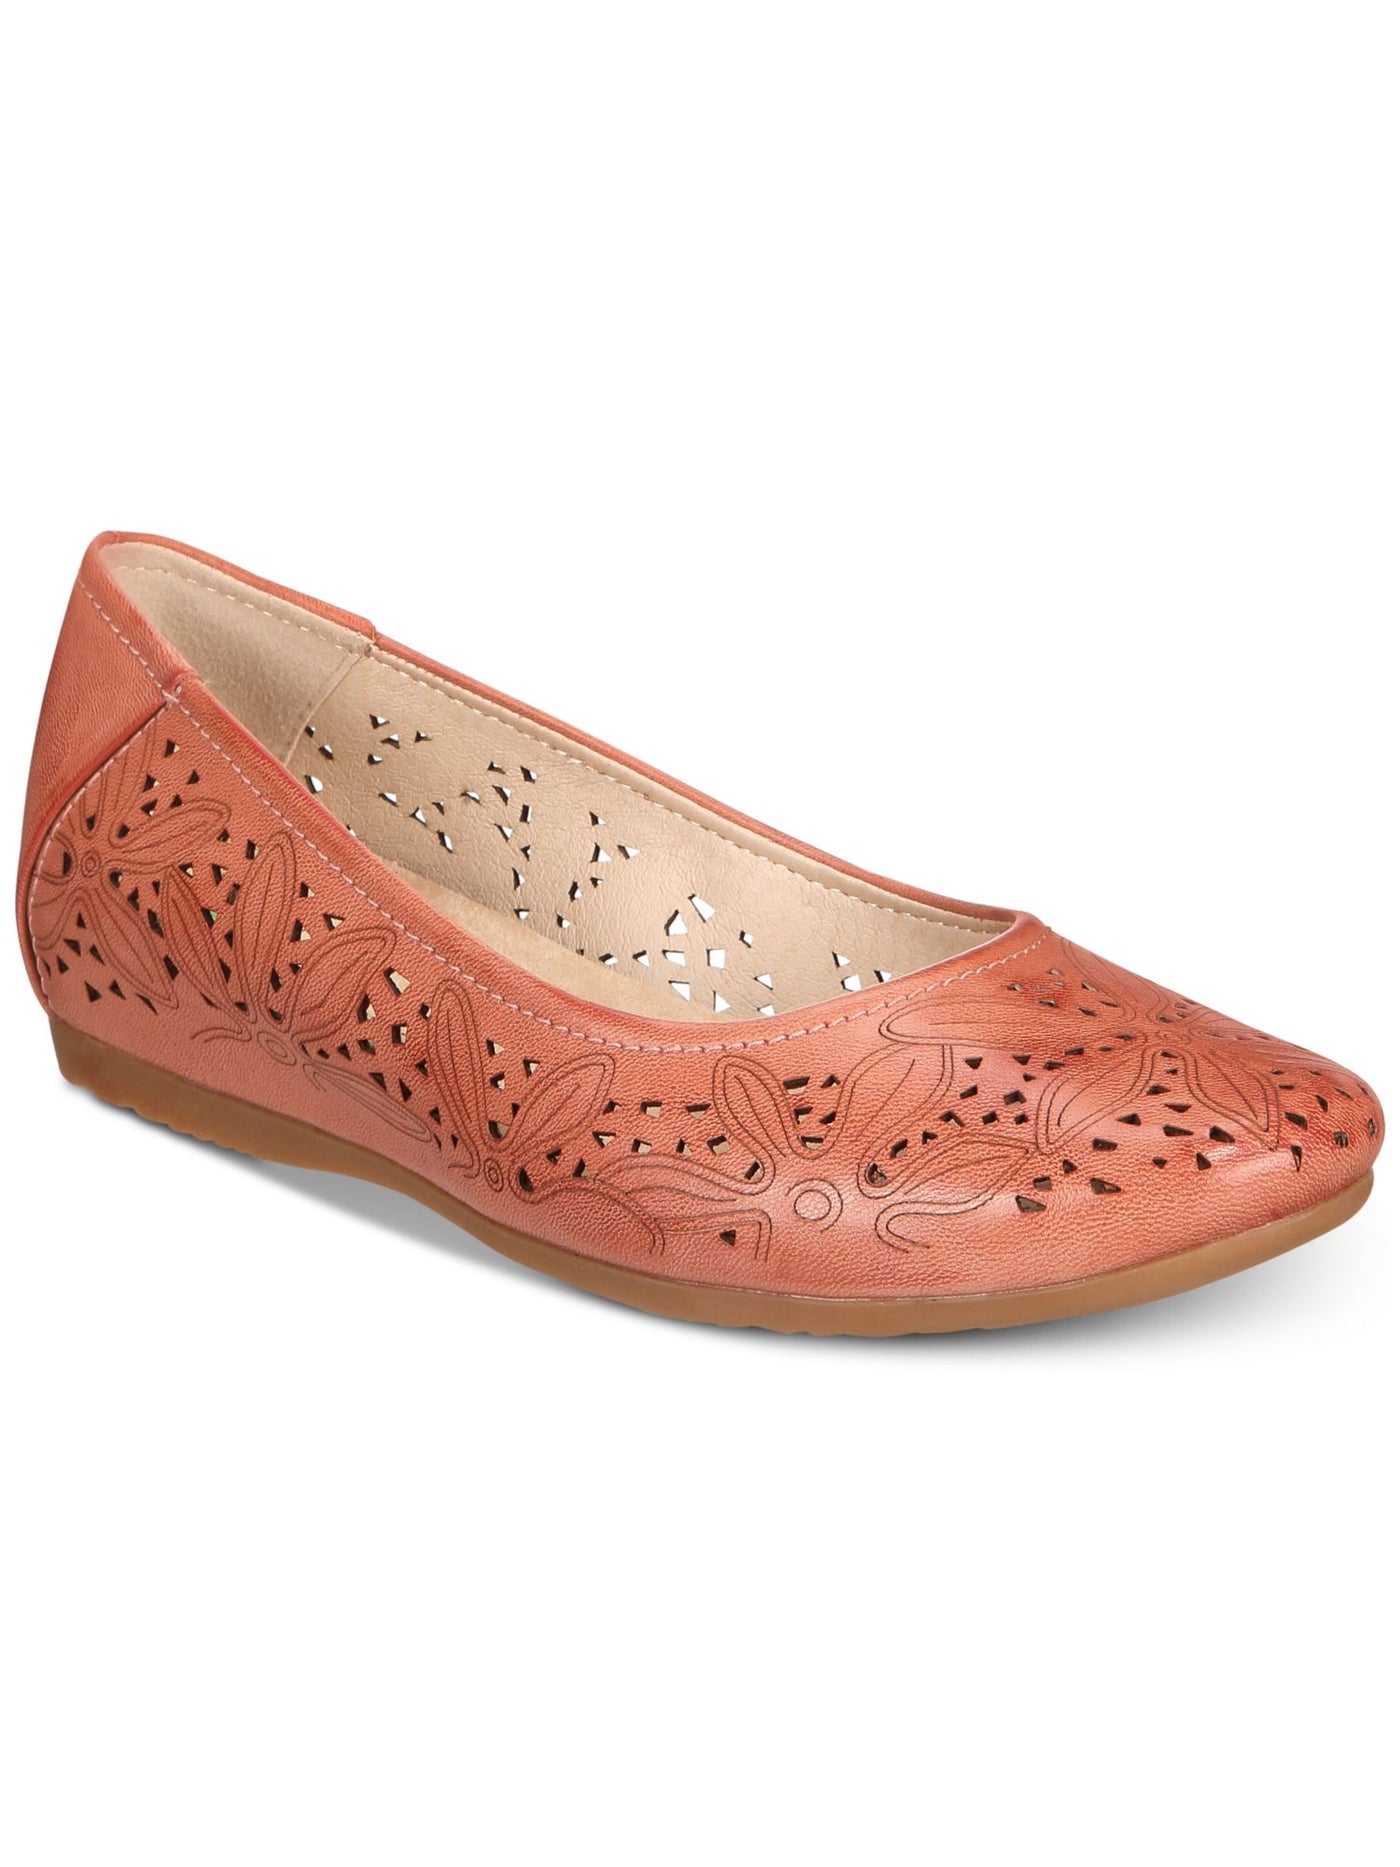 BARETRAPS Womens Coral Perforations Hidden Heel Mariah Round Toe Wedge Slip On Flats Shoes 9 M